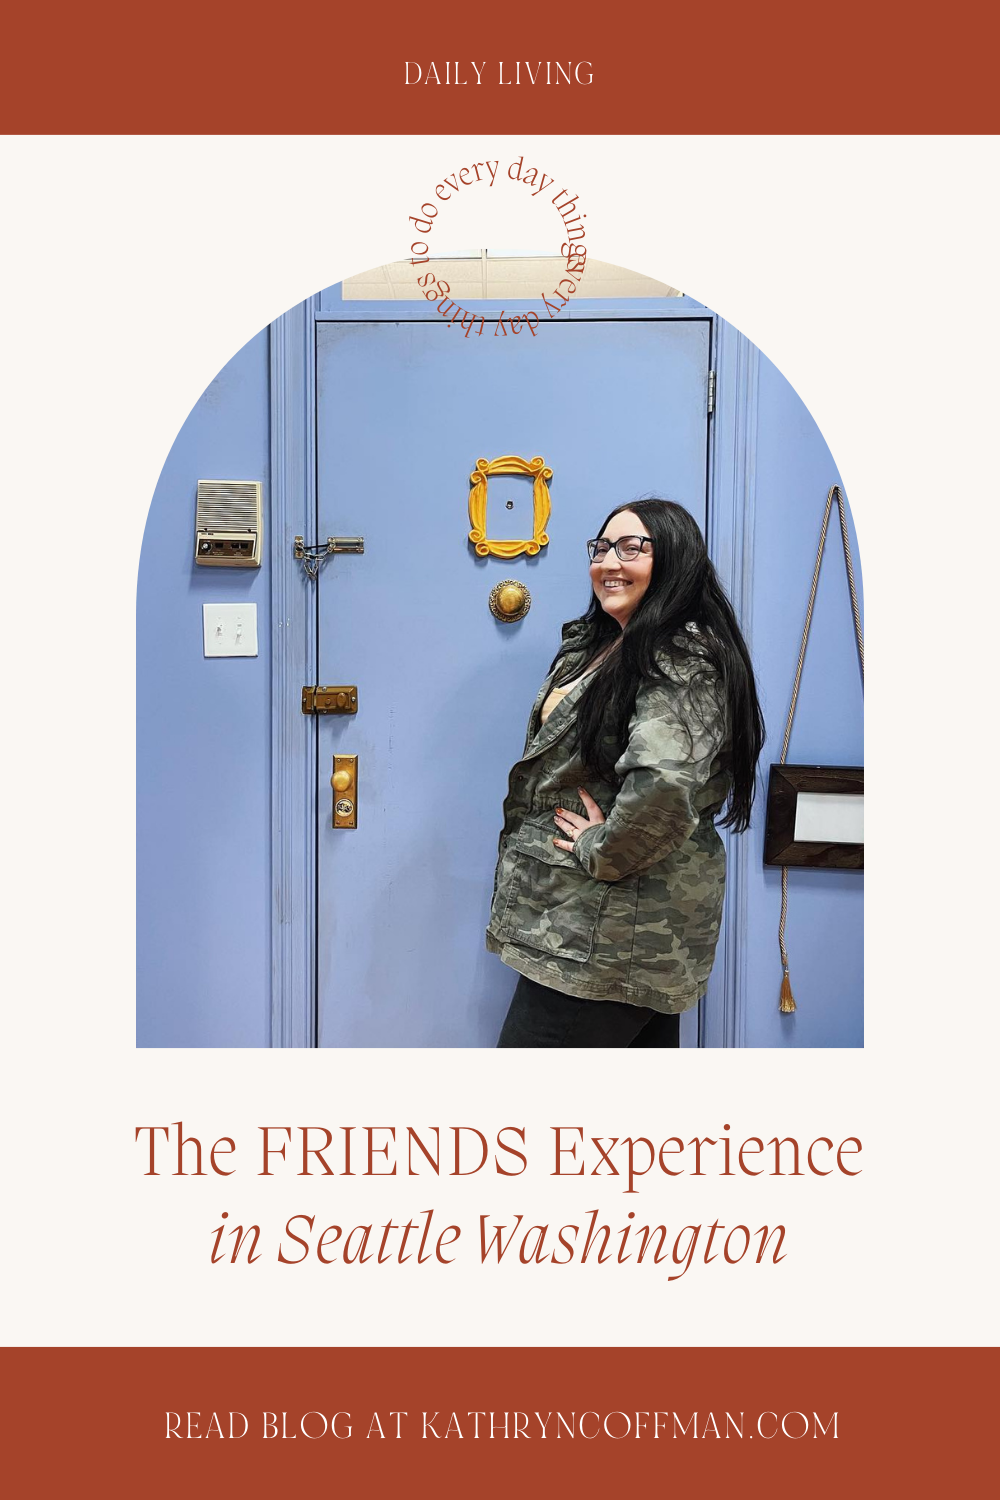 Friends' experience coming to Seattle